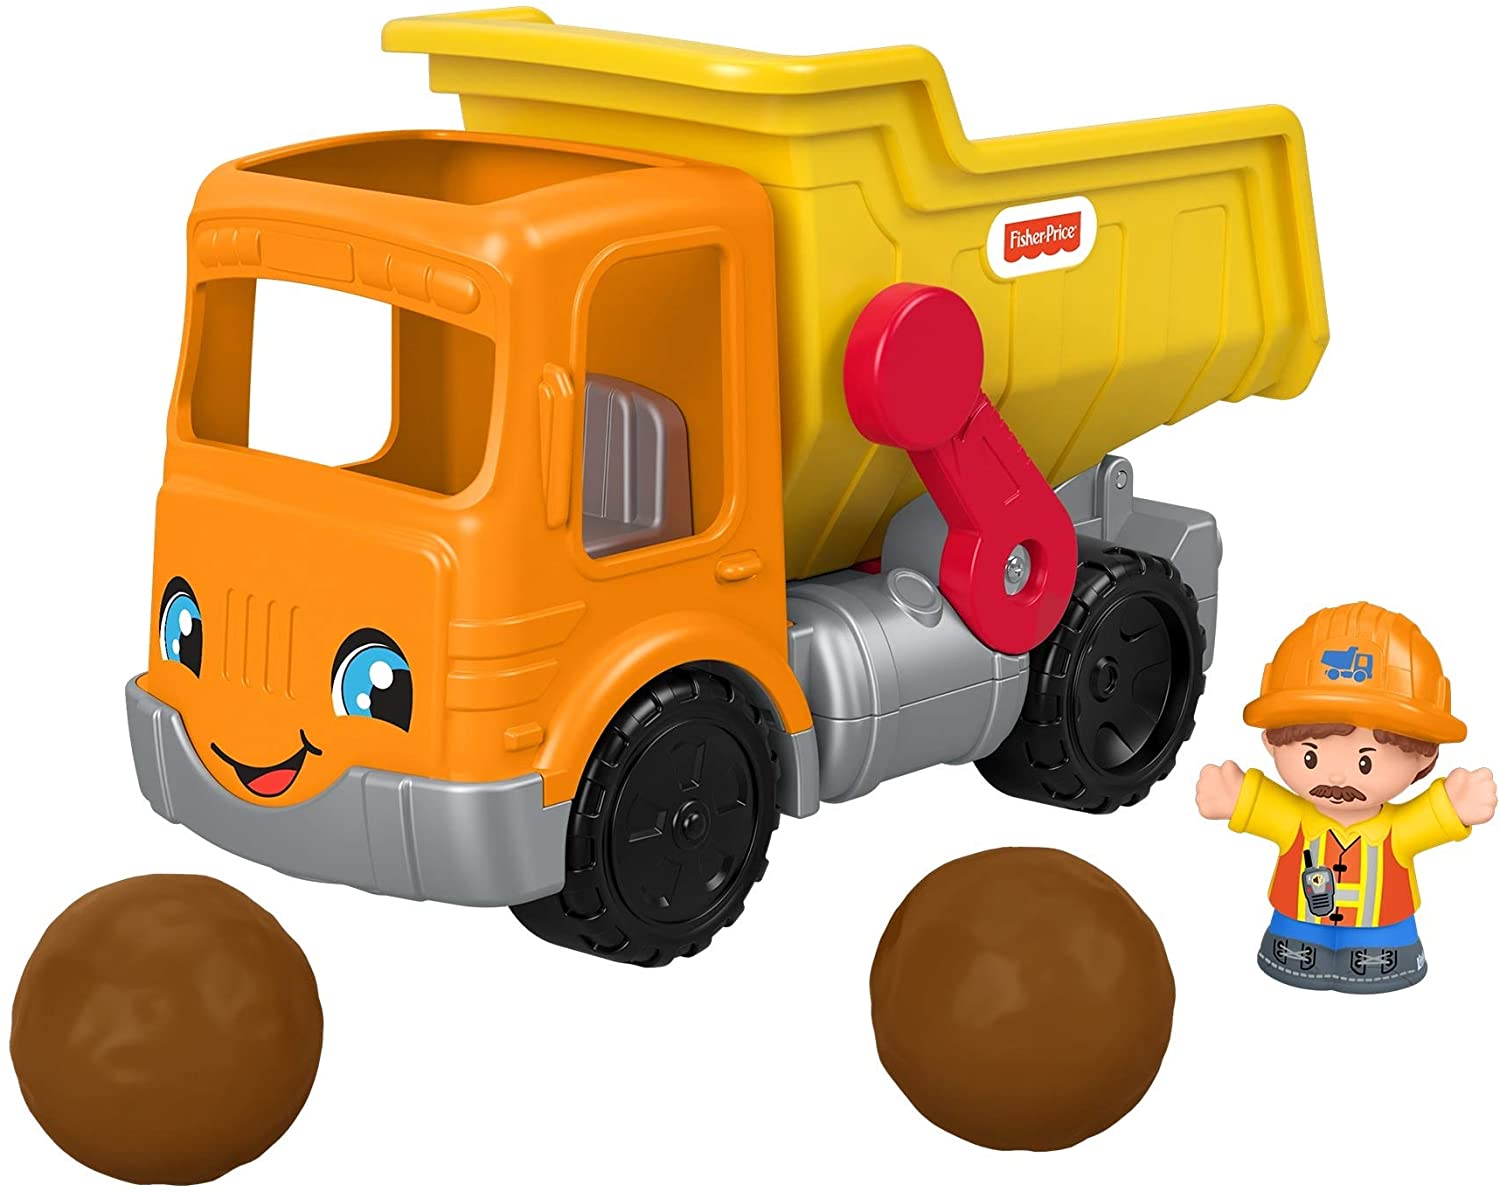 Fisher - Price Gmx90 Little People Truck With Sounds And Toy For Toddlers F